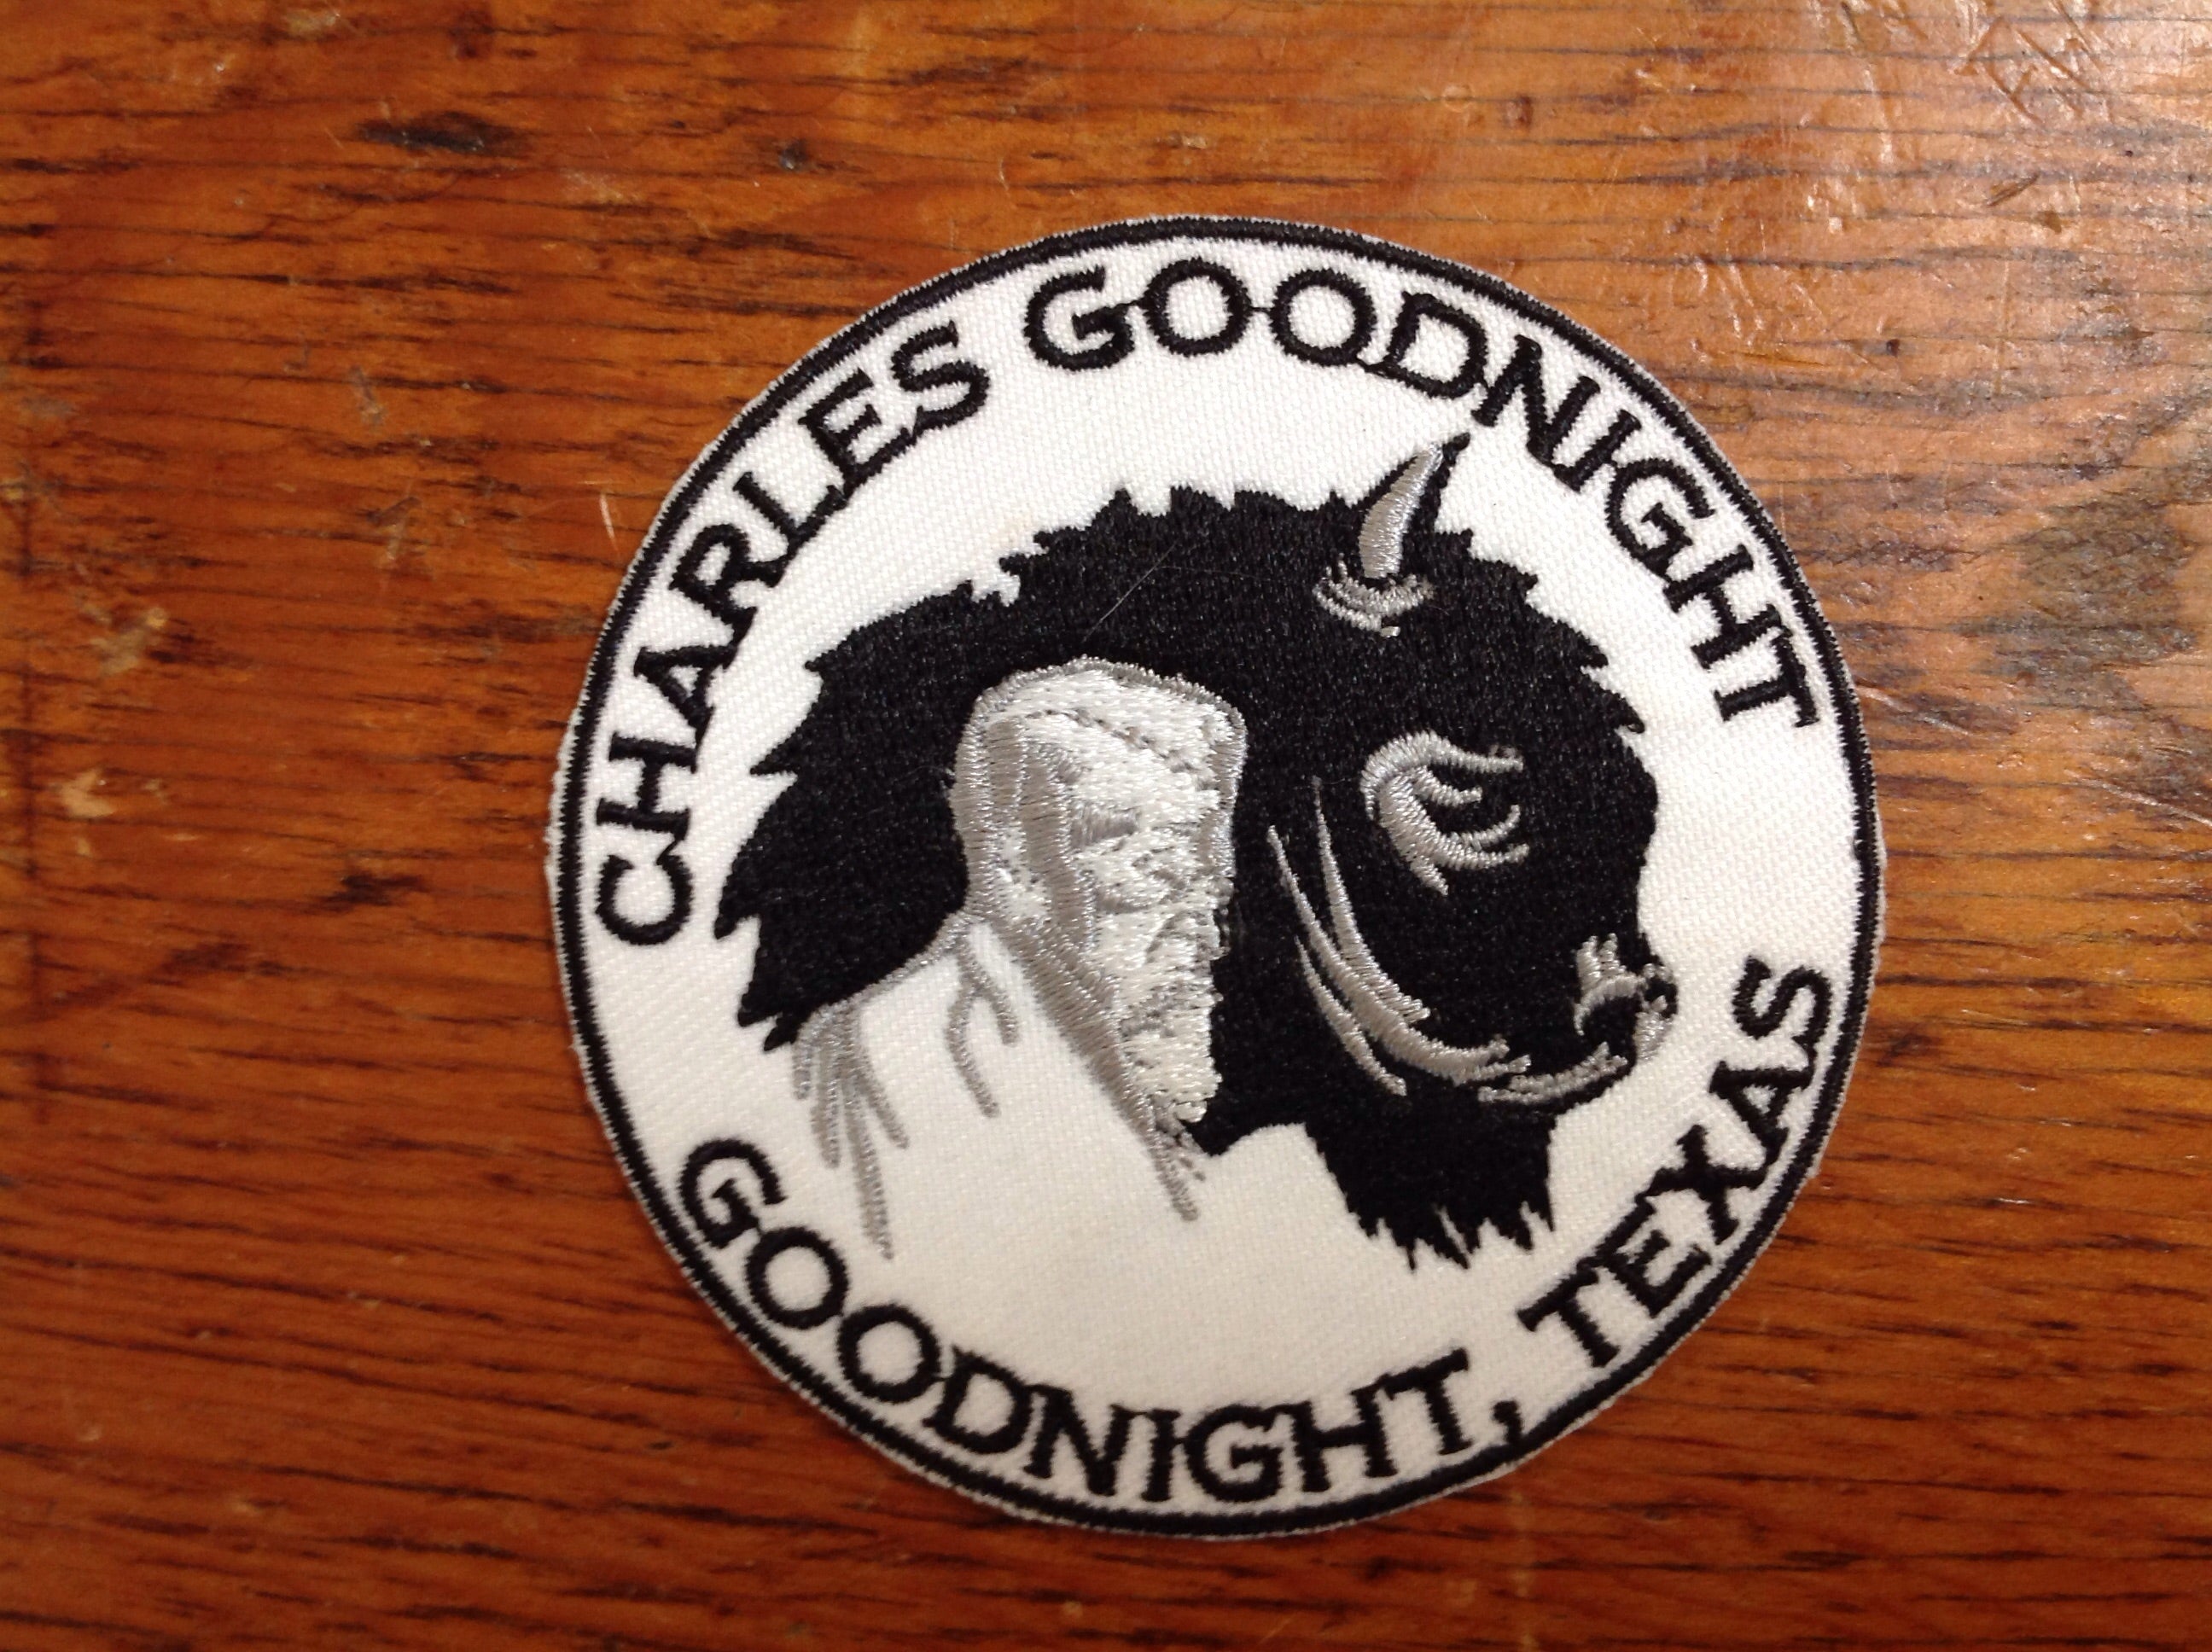 The Herd Wear - Goodnight embroidered patch collection